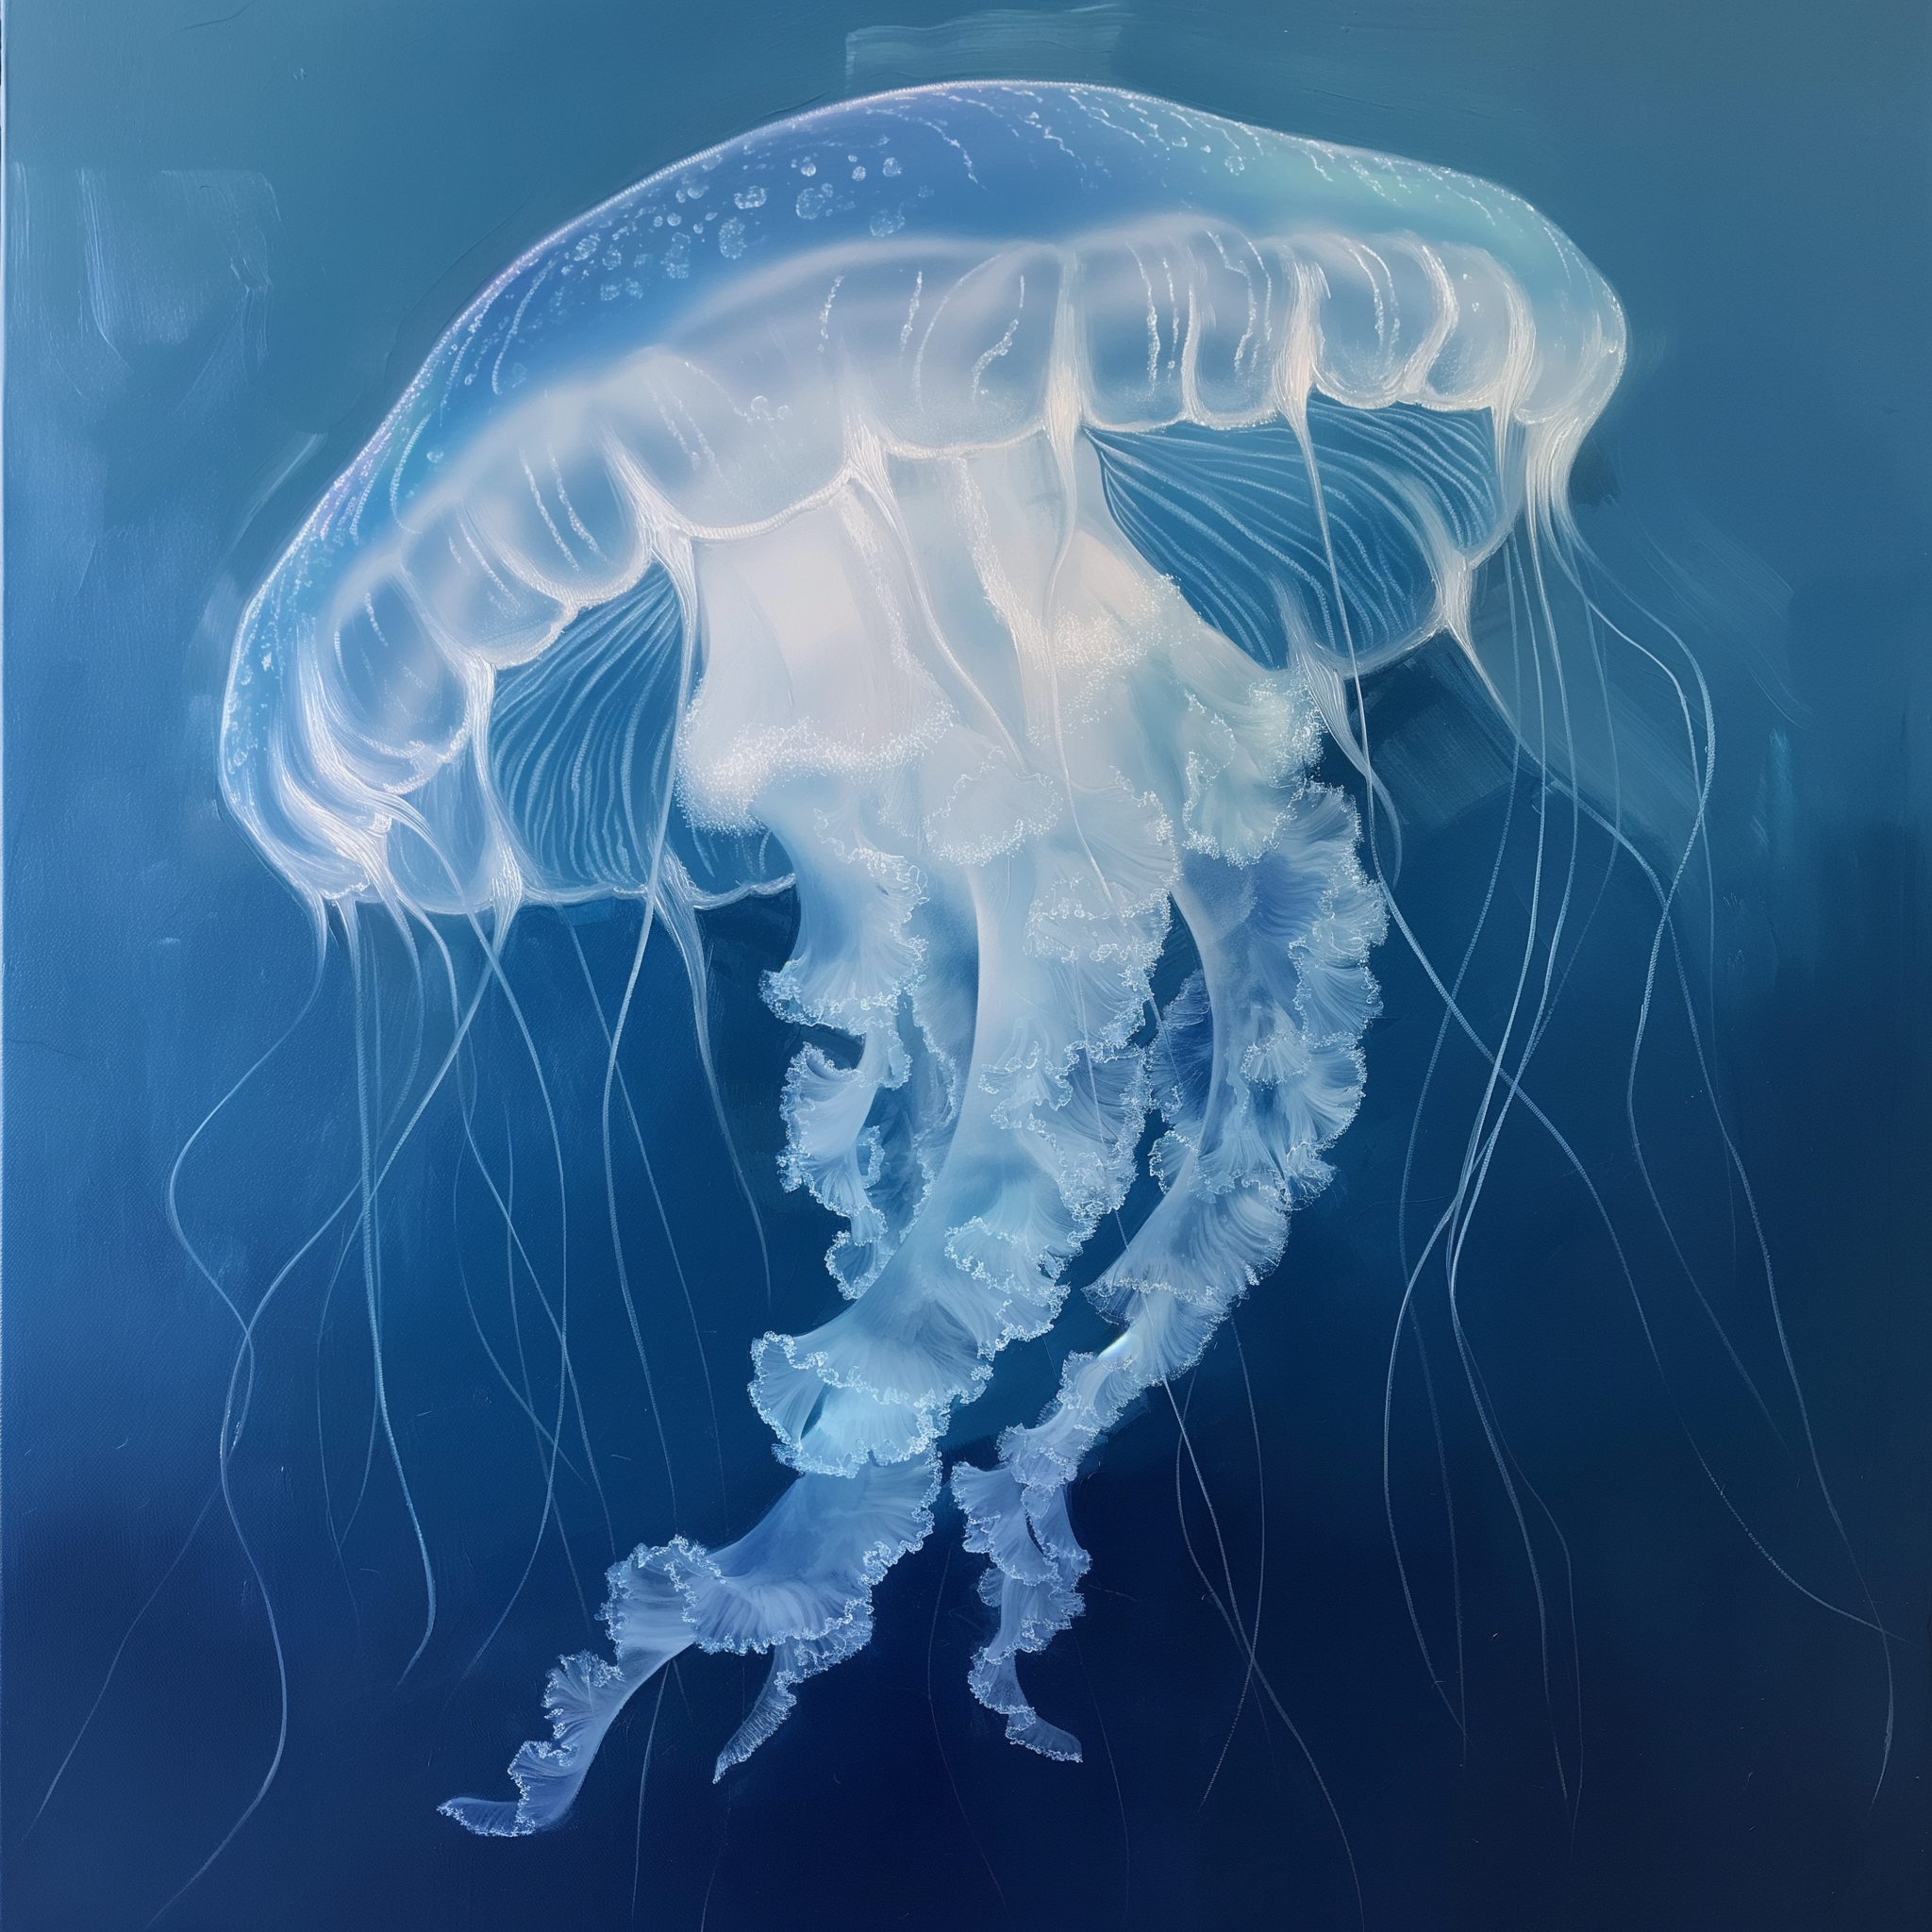 Avatar of a translucent jellyfish with delicate tentacles floating in a serene blue underwater backdrop.